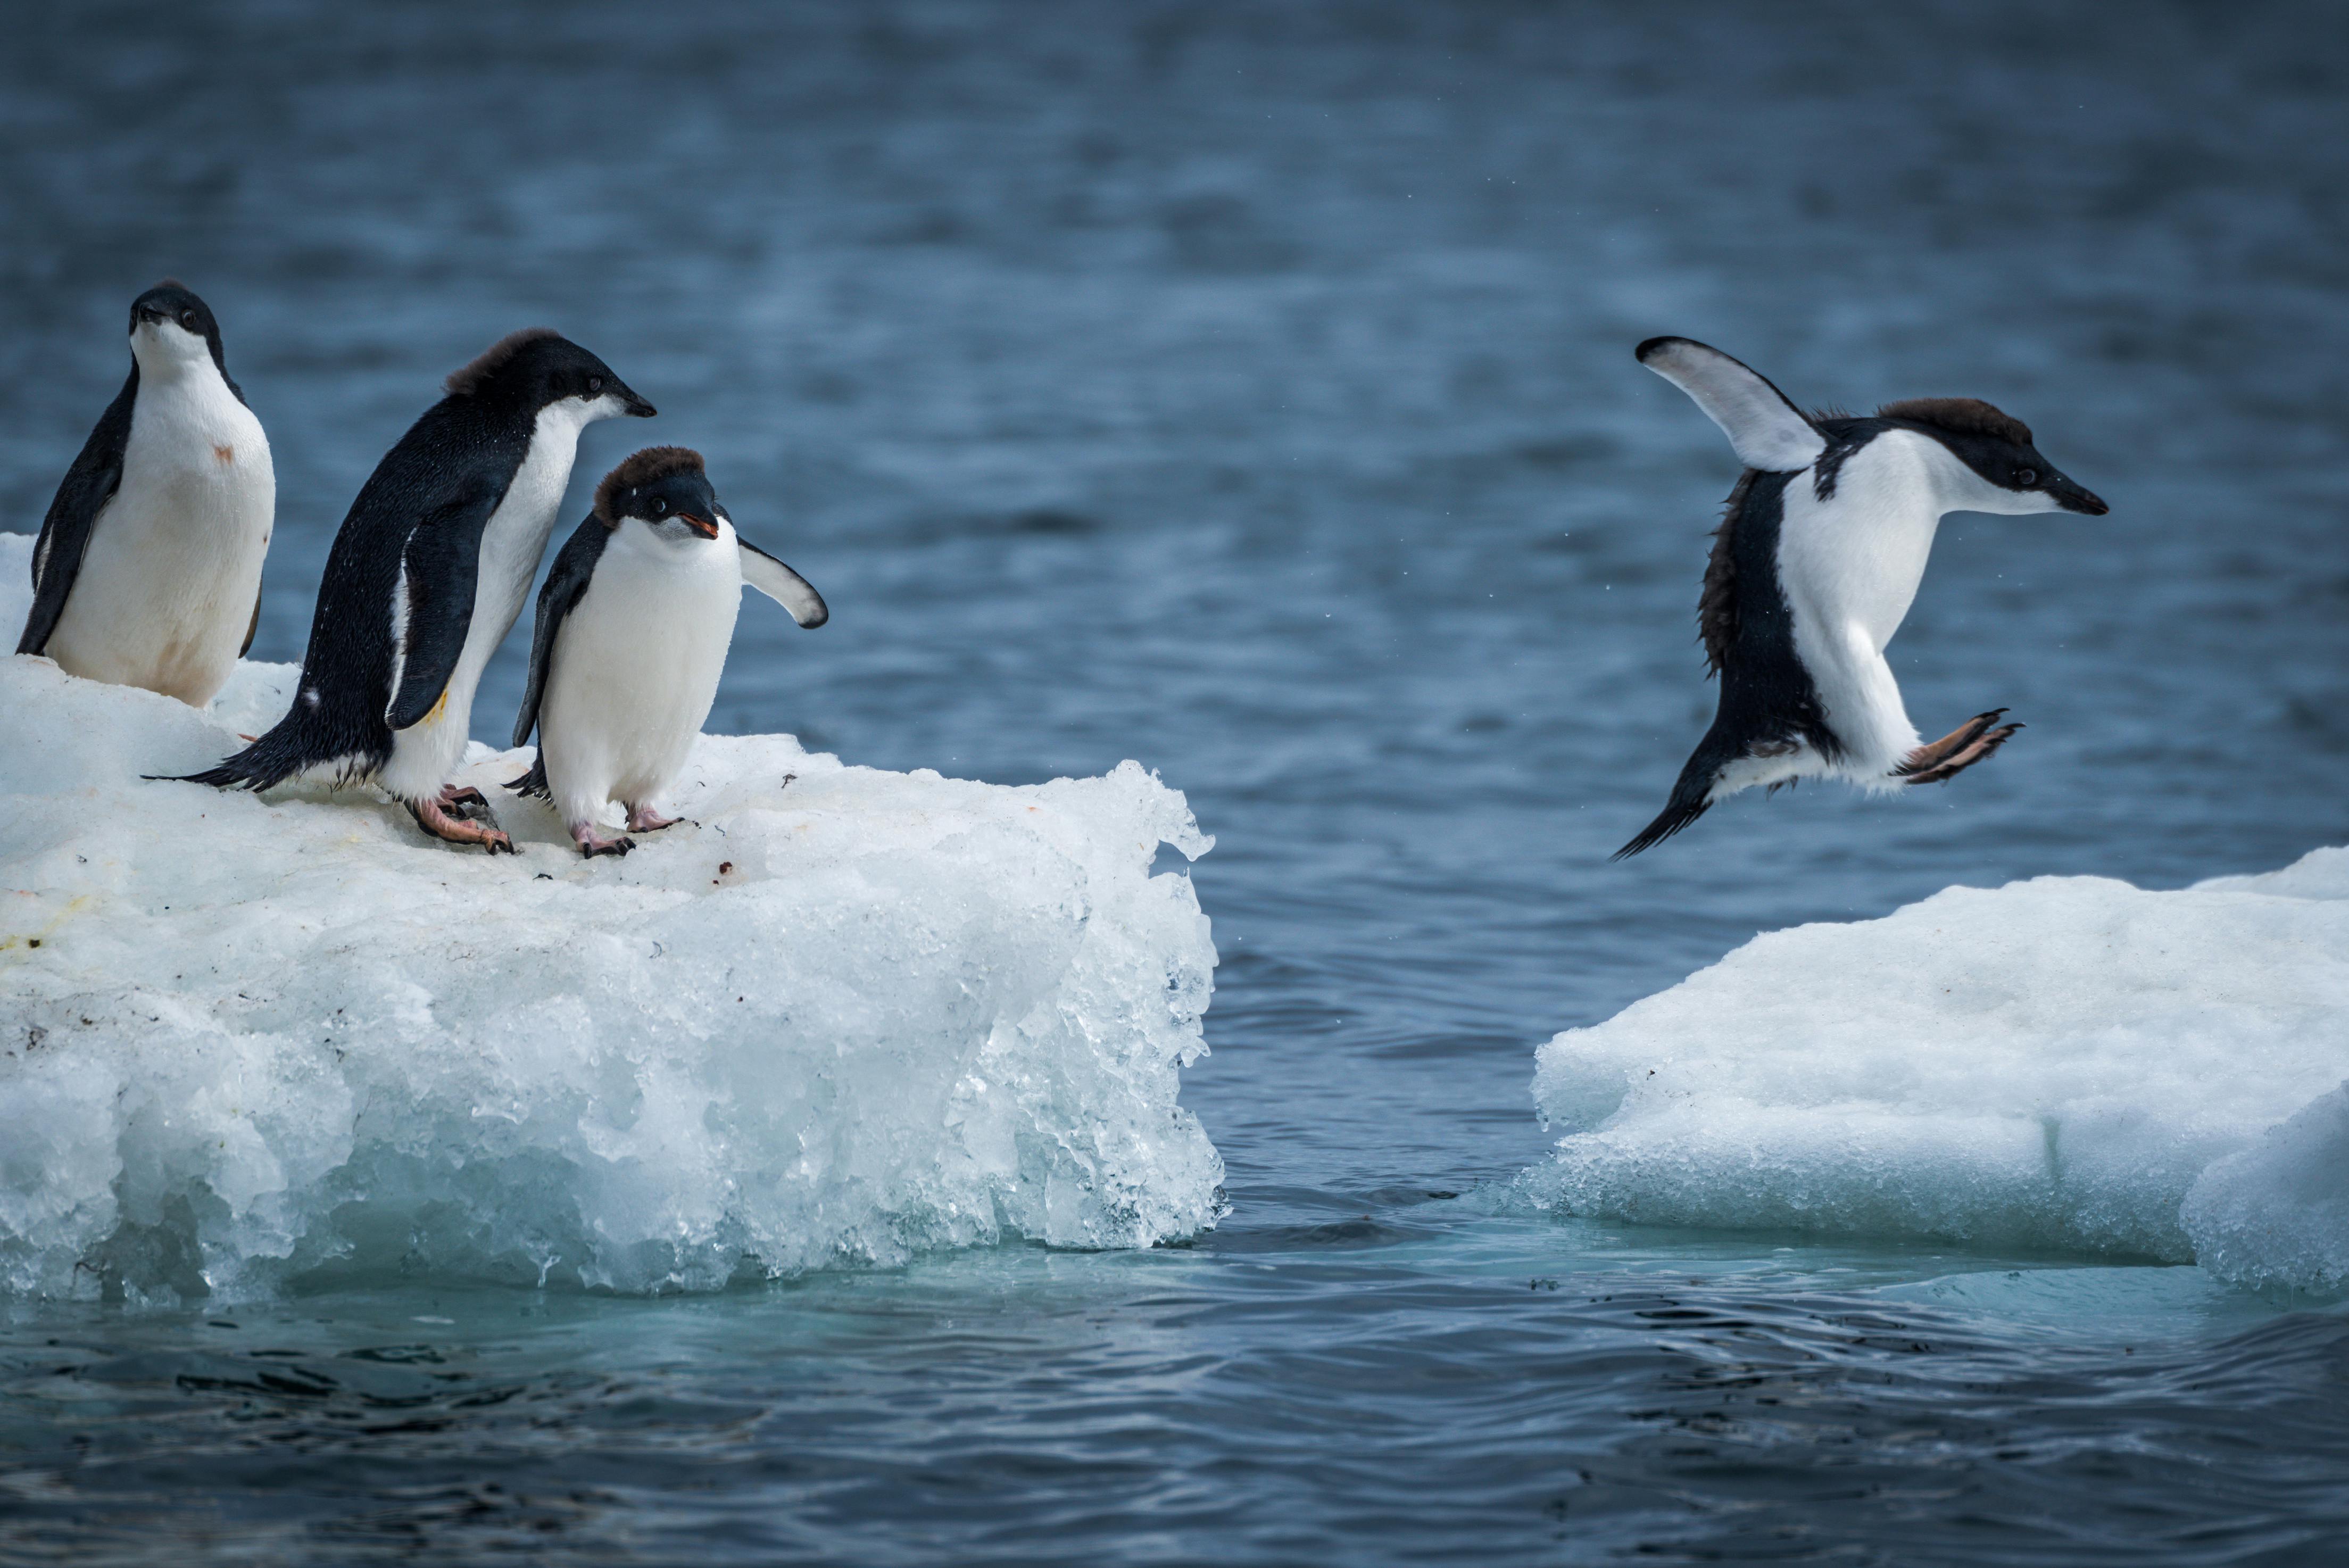 Penguins jumping between ice